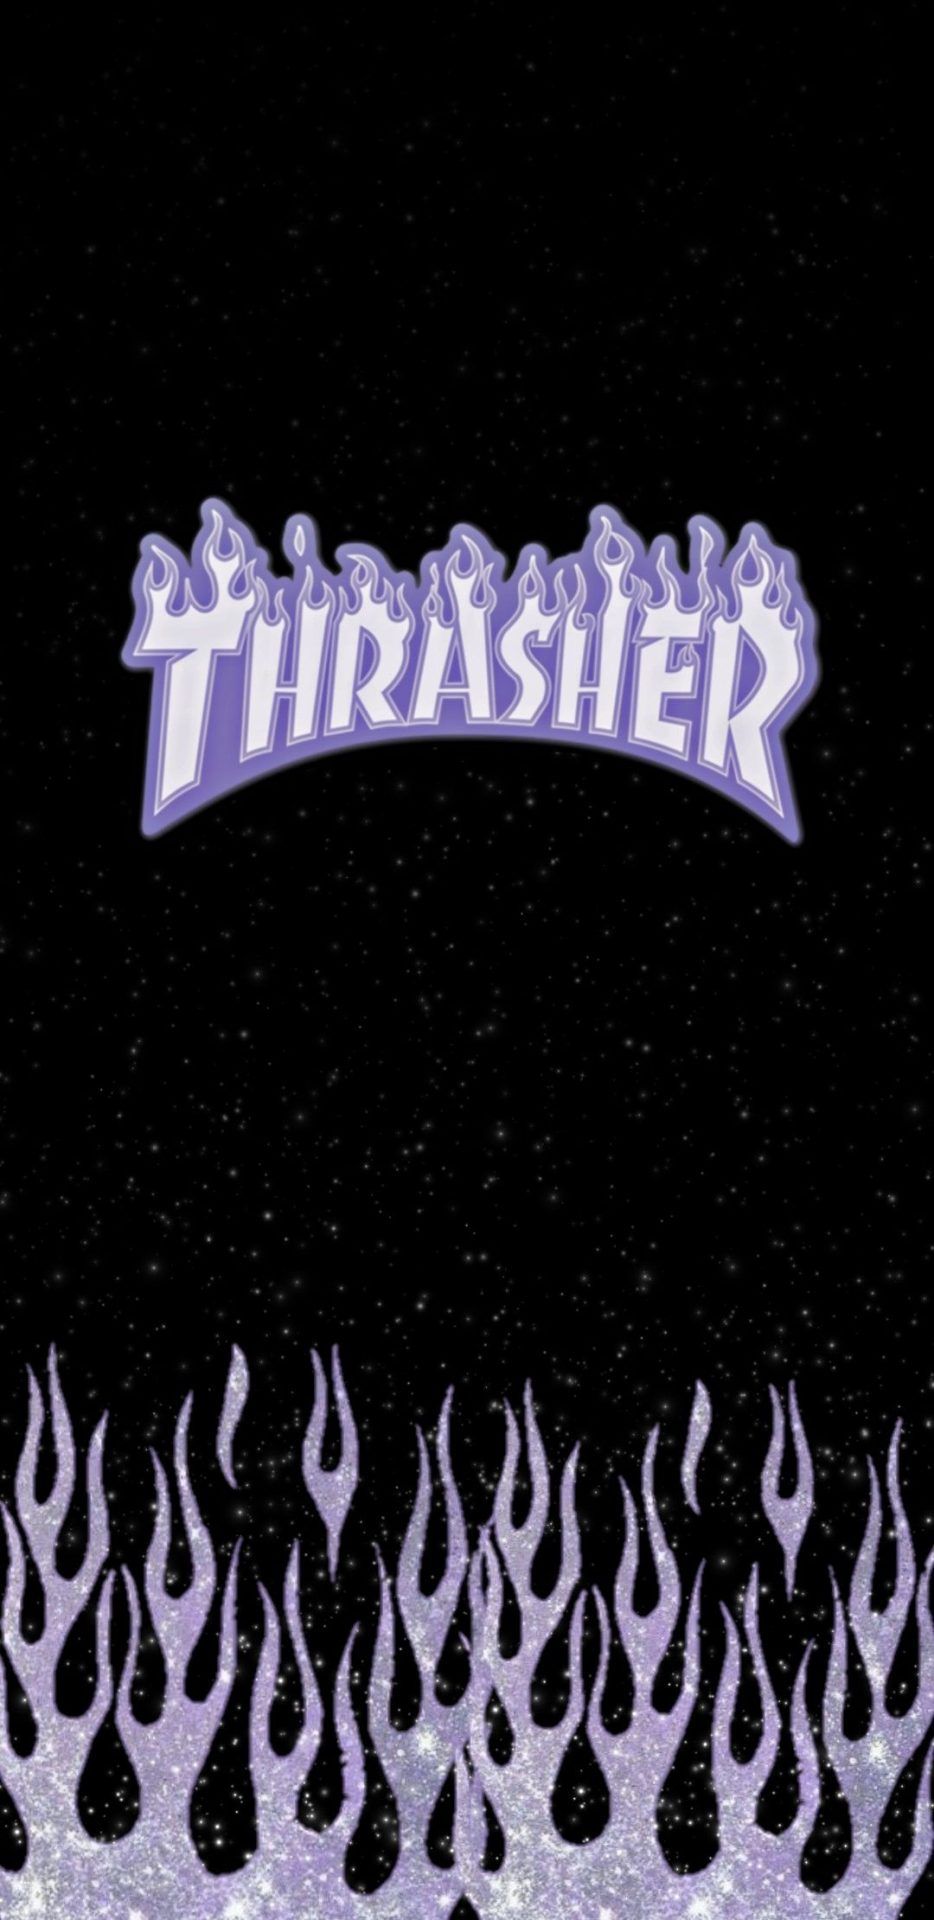 Thrasher iPhone Wallpaper with high-resolution 1080x1920 pixel. You can use this wallpaper for your iPhone 5, 6, 7, 8, X, XS, XR backgrounds, Mobile Screensaver, or iPad Lock Screen - Trippy